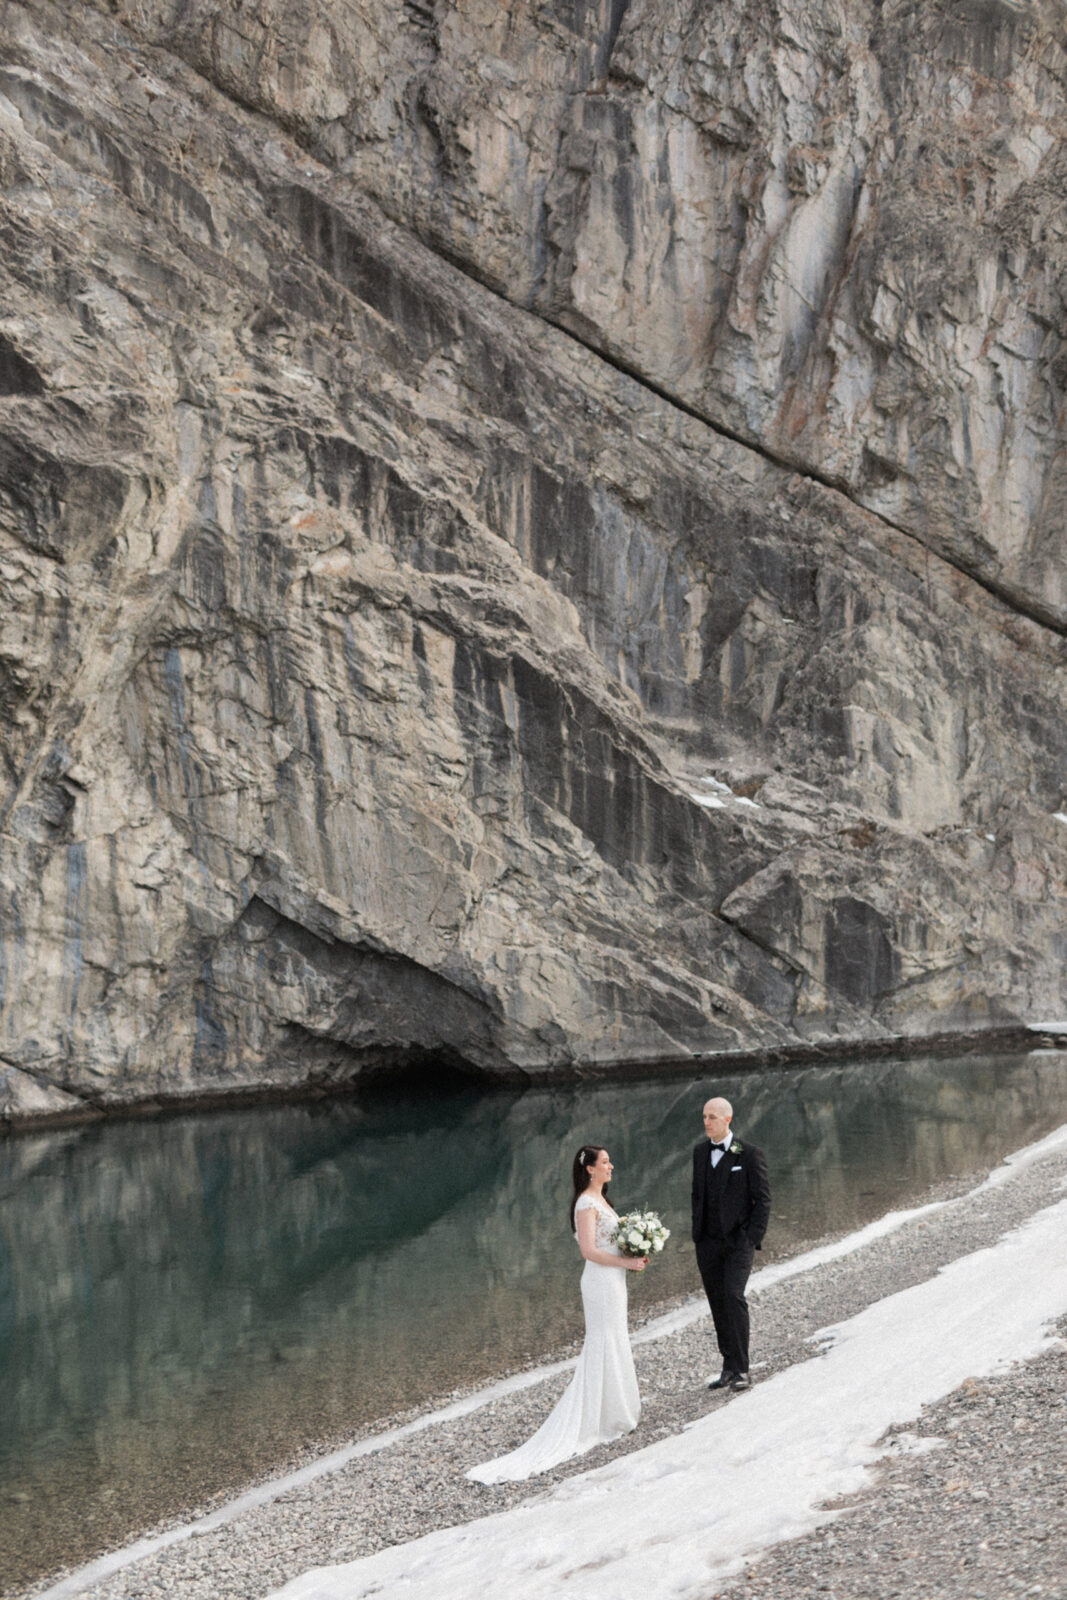 Epic wedding day portraits in the Canadian Rocky Mountains